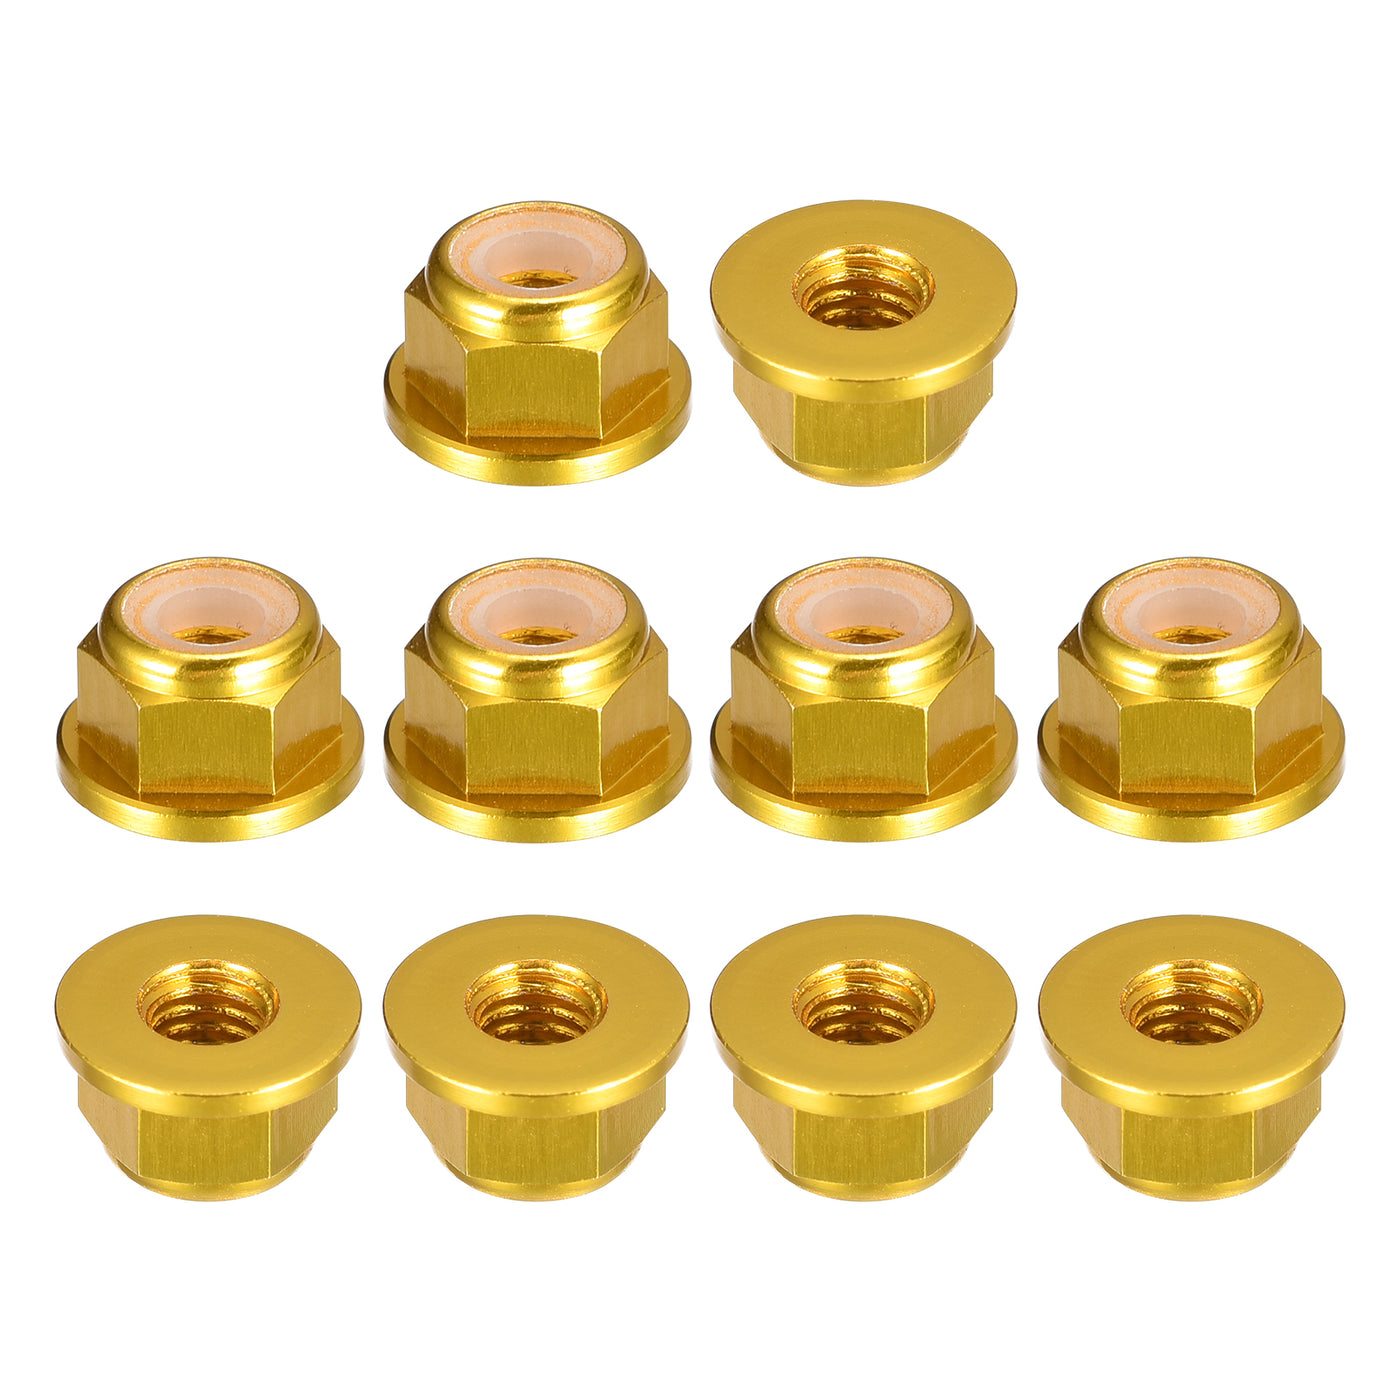 uxcell Uxcell Nylon Insert Hex Lock Nuts, 10pcs - M4 x 0.7mm Aluminum Alloy Self-Locking Nut, Anodizing Flange Lock Nut for Fasteners (Gold)